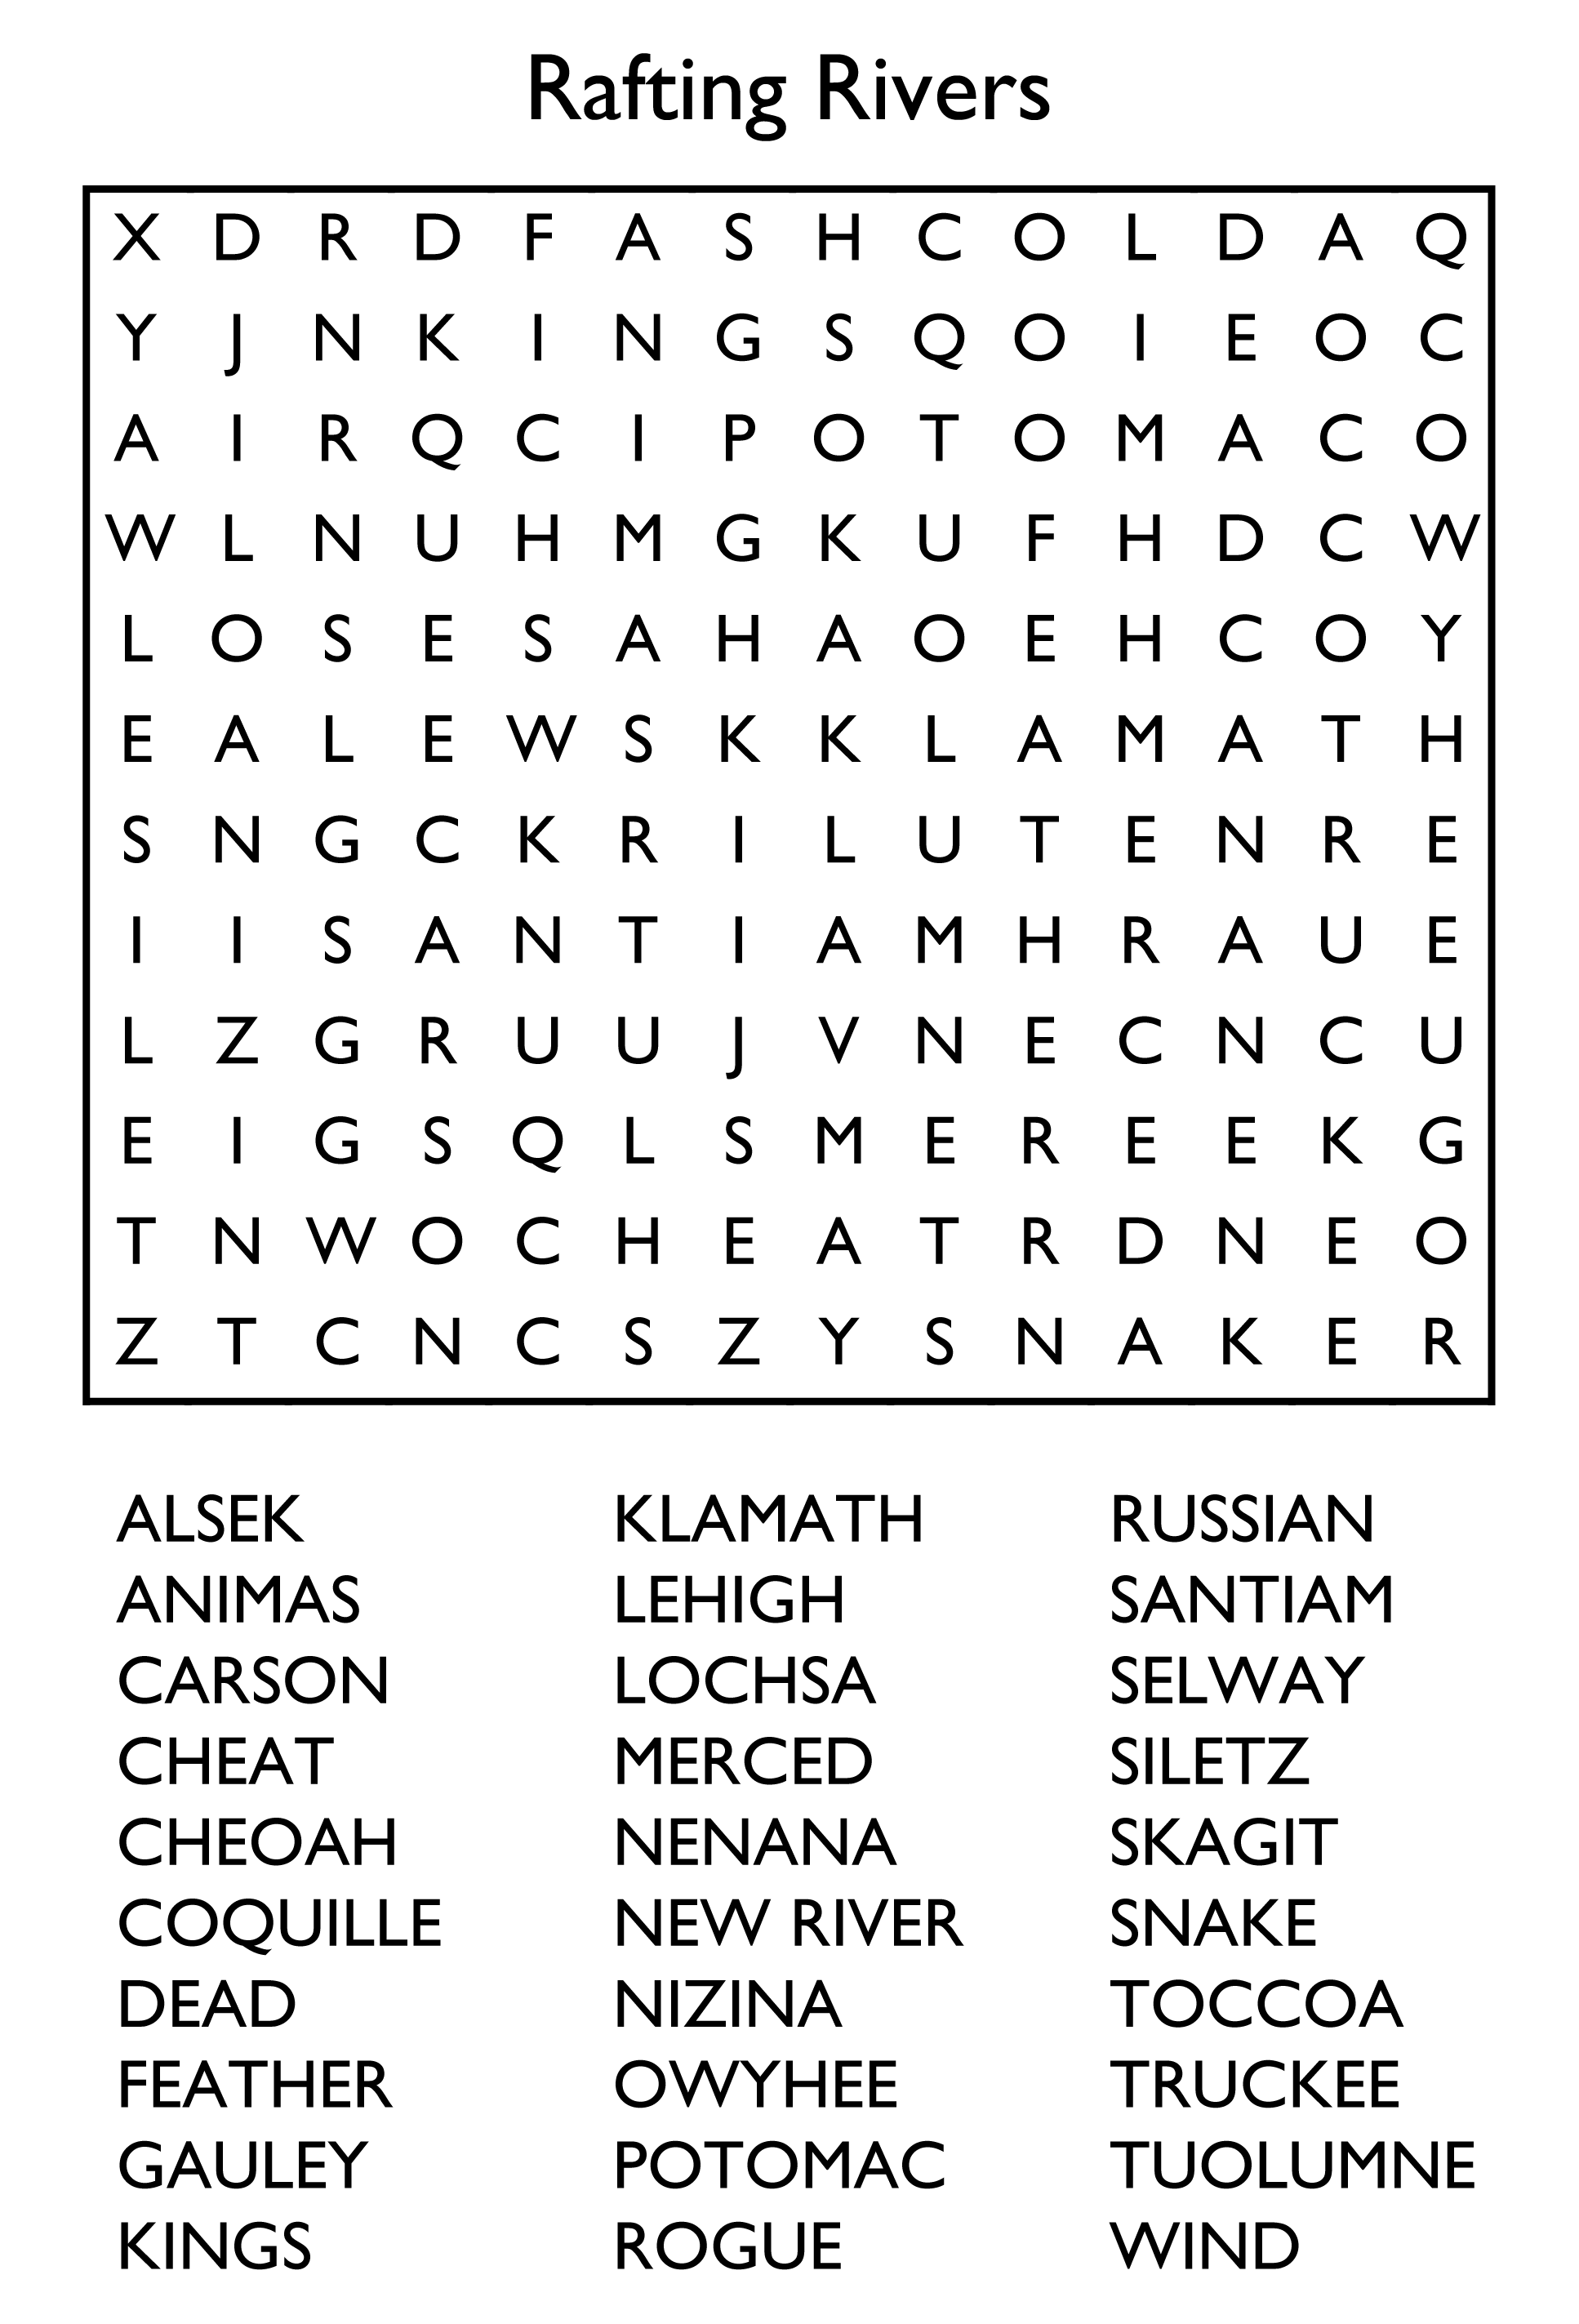 Free Printable Word Search Puzzle - Rafting Rivers